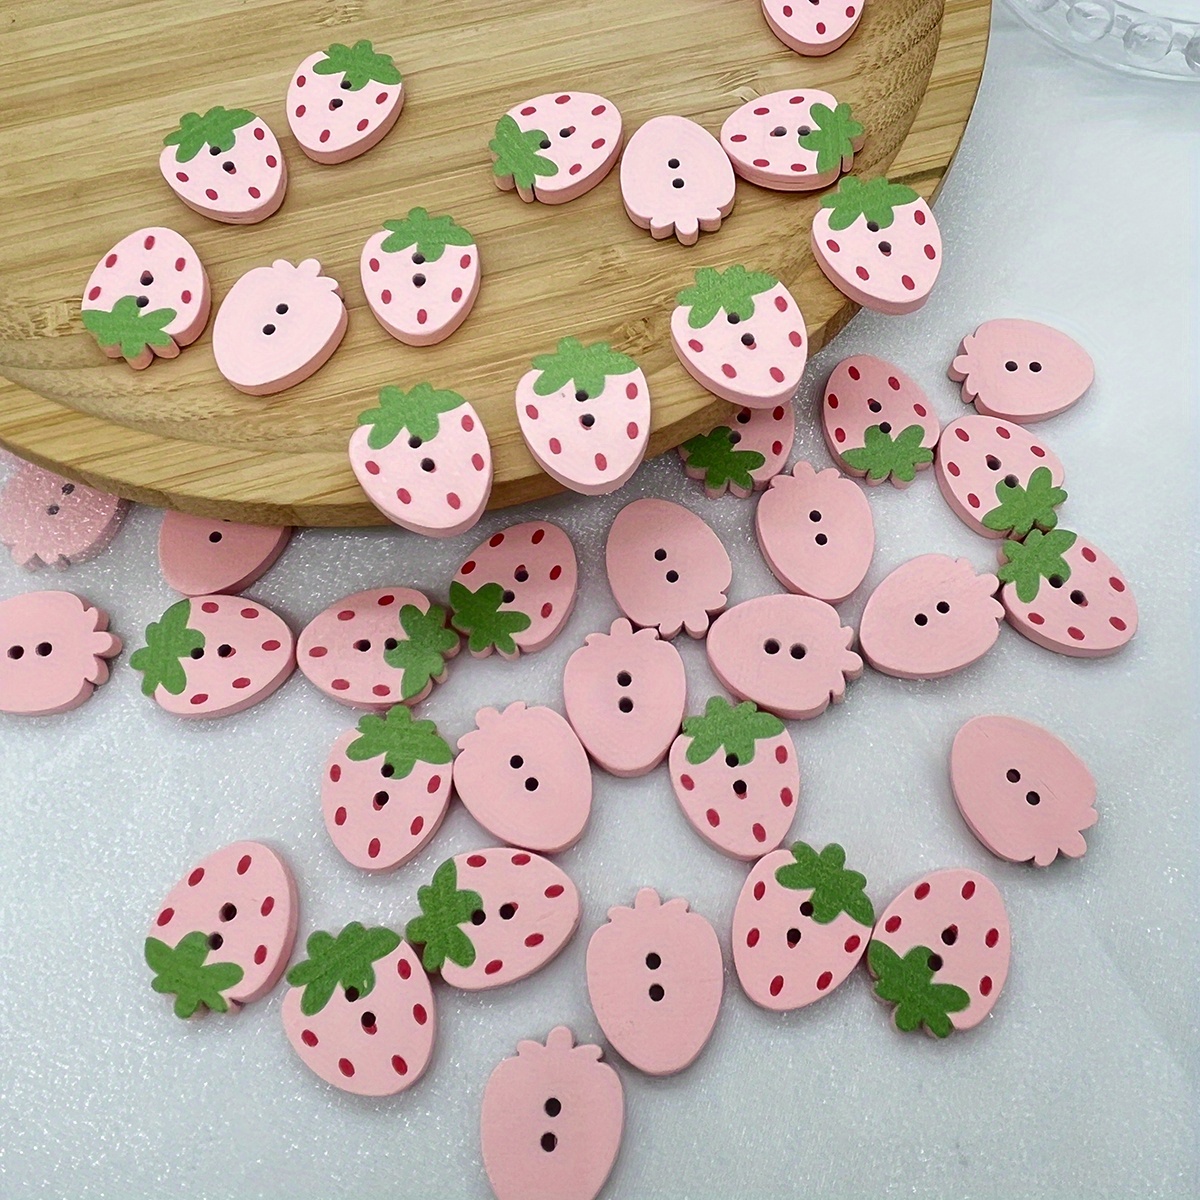 100pcs 10-18mm Mixed Wooden Buttons in Bulk, Buttons for Crafts Kids  Premium Buttons for Sewing Craft Clothing, DIY Project Need 2 Holes Round  Wood